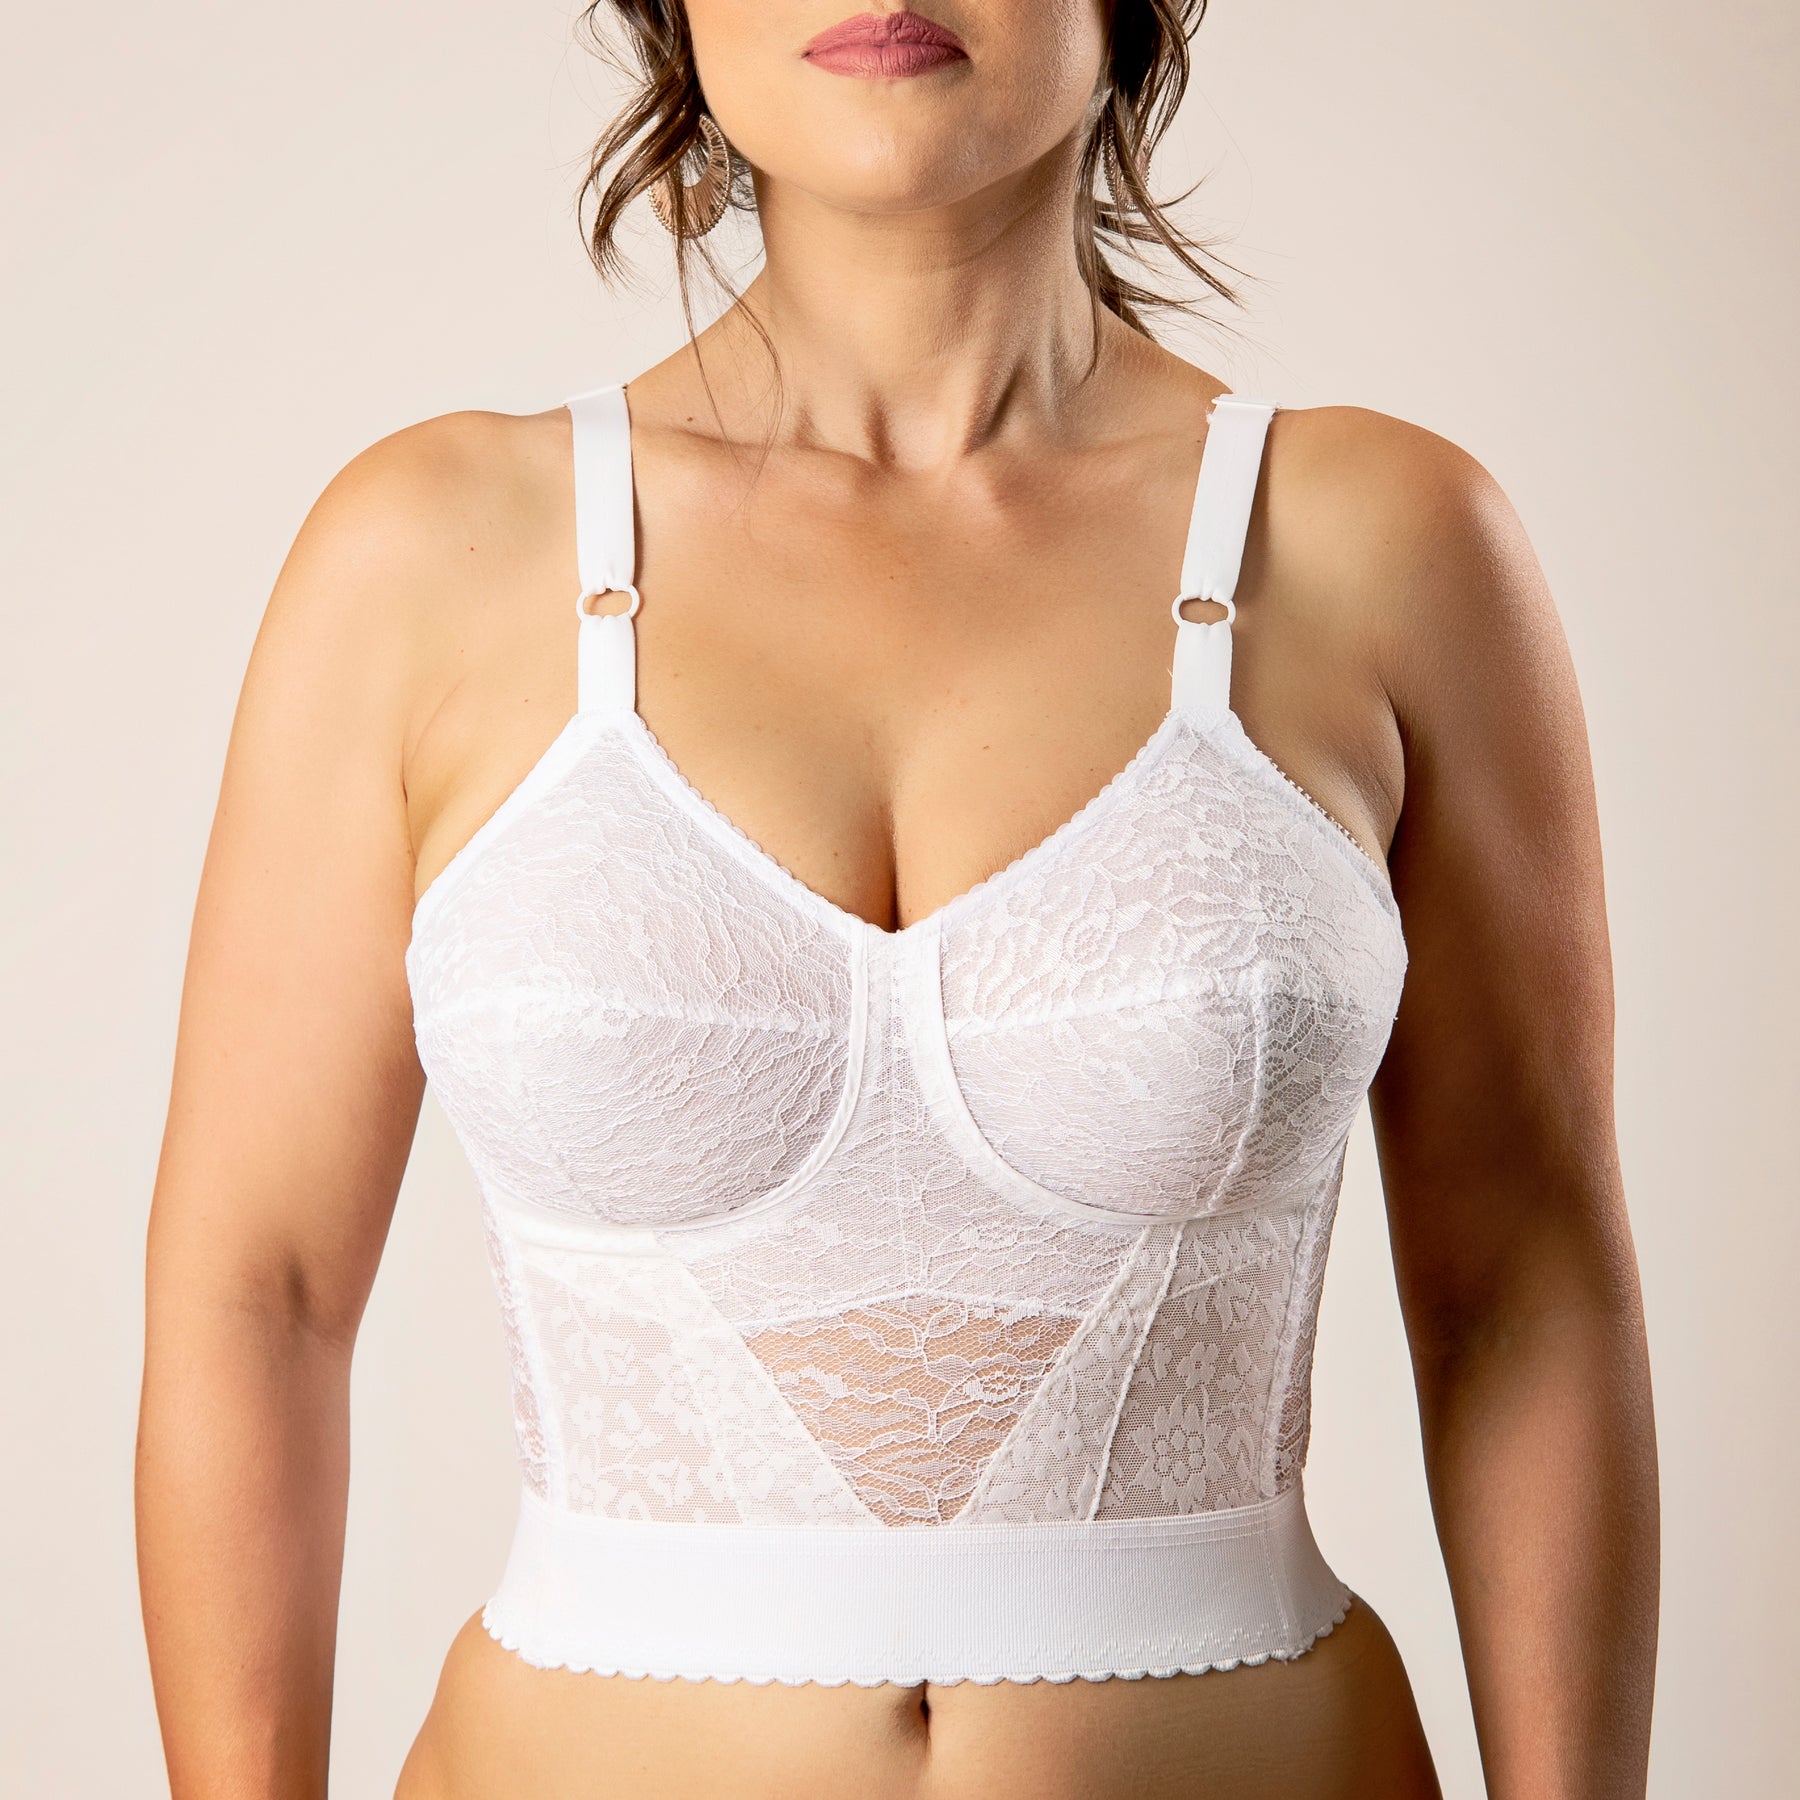 Rago Style 2202 - Long Line “Expandable Cup” Bra, 34D, Black at   Women's Clothing store: Garters